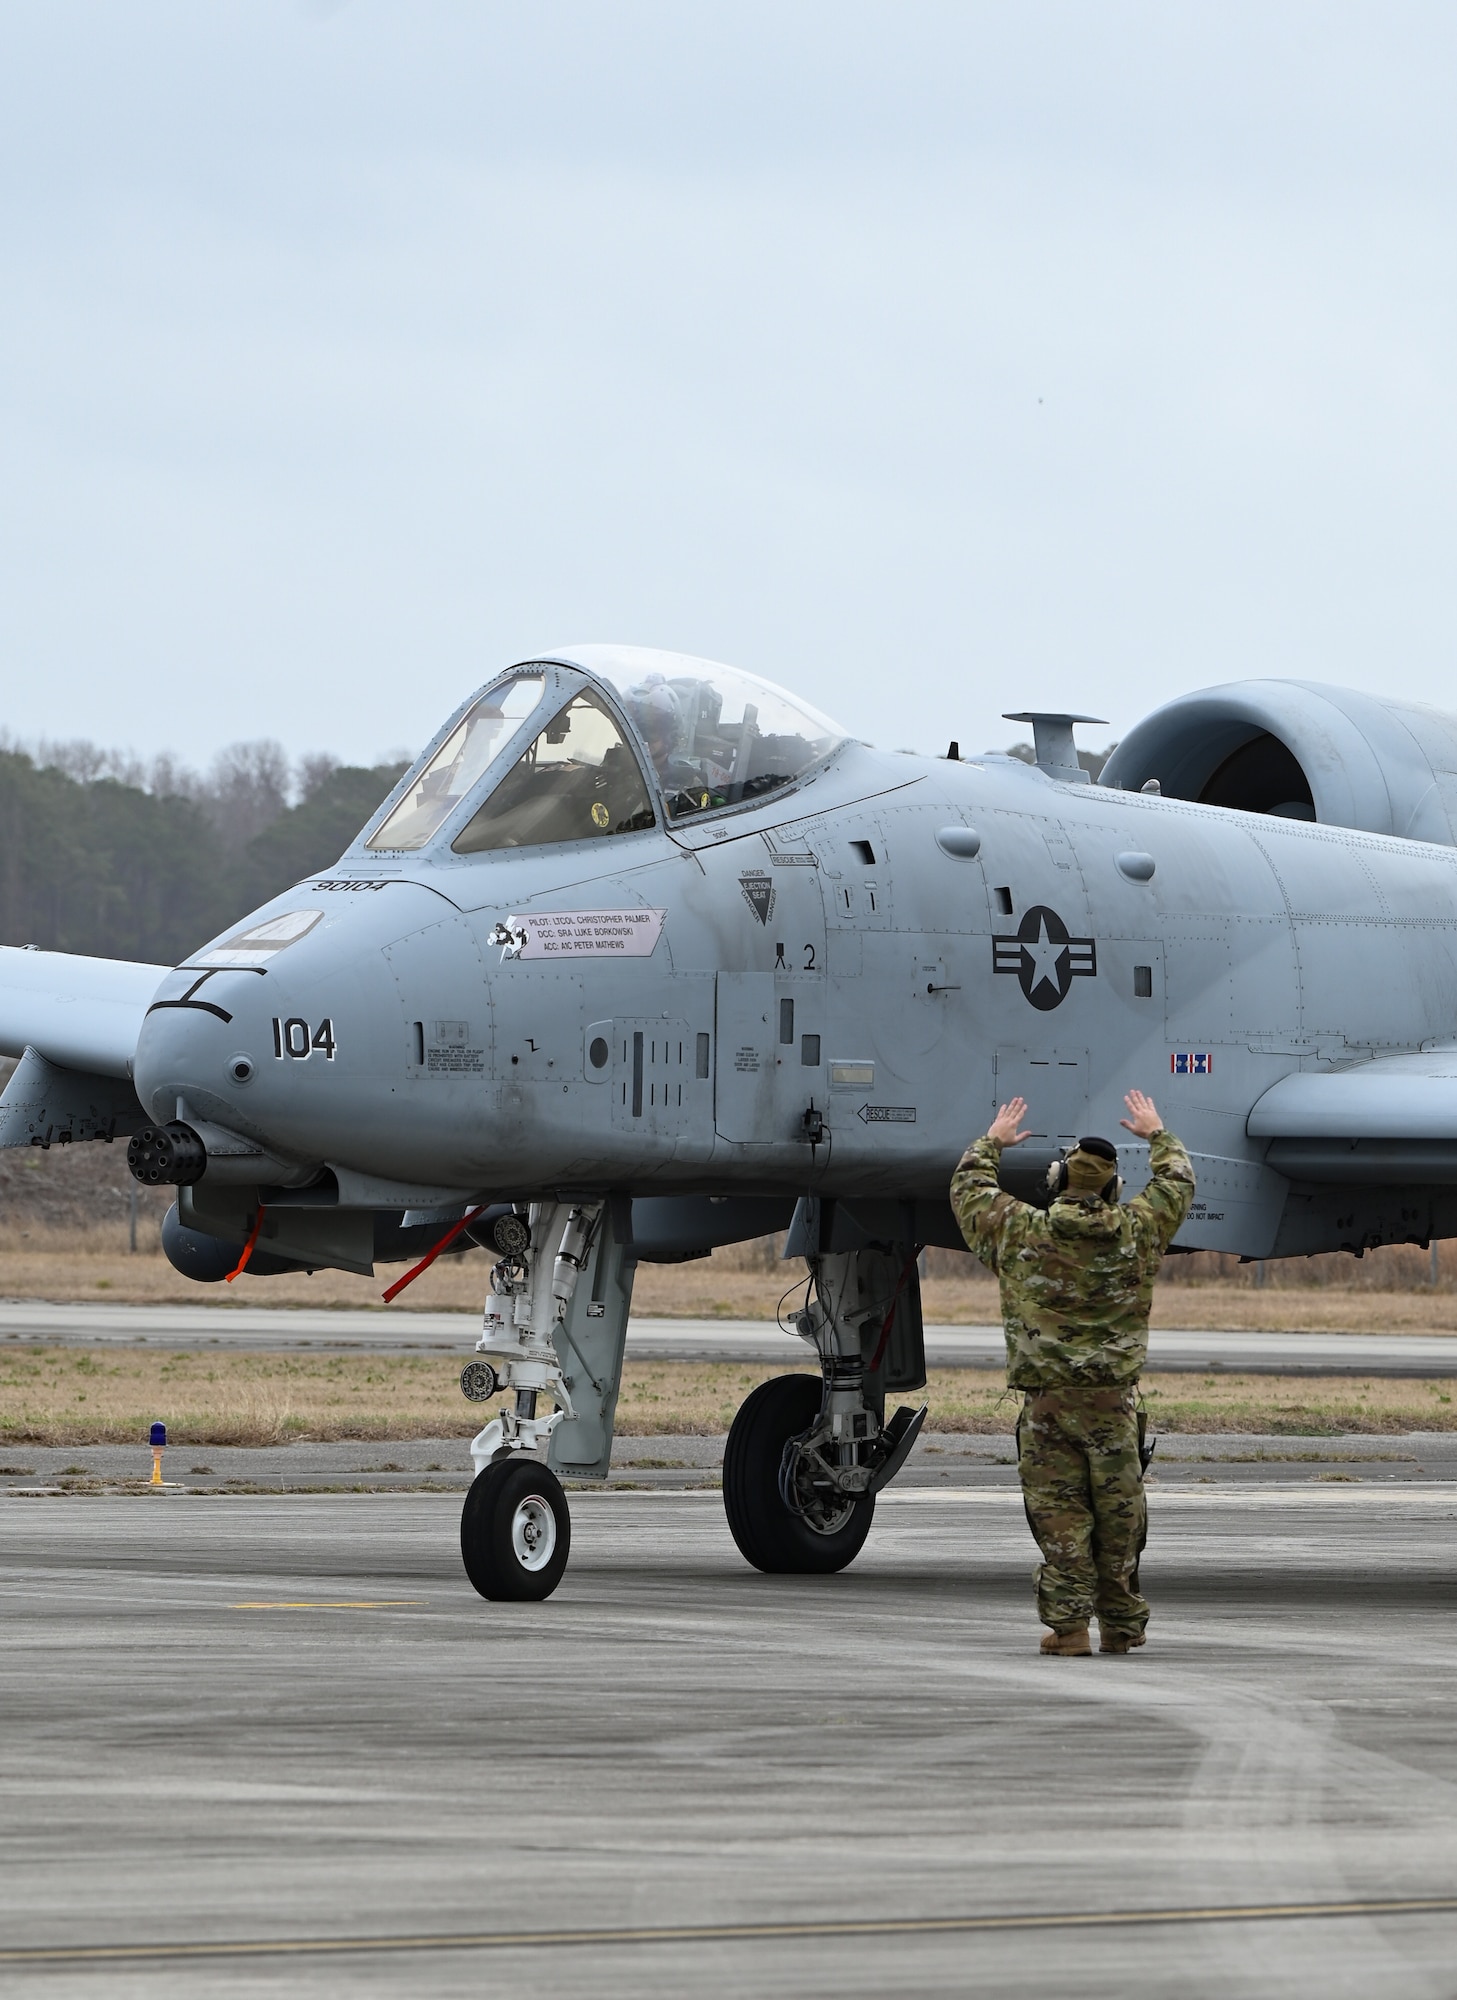 A U.S. Air Force crew chief from the 175th Aircraft Maintenance Squadron, Maryland Air National Guard, guides an A-10C Thunderbolt II aircraft on the flight line at Hunter Army Airfield, Georgia, on Jan. 25, 2023 in support of exercise Sunshine Rescue, a National Guard Bureau special focused training event.